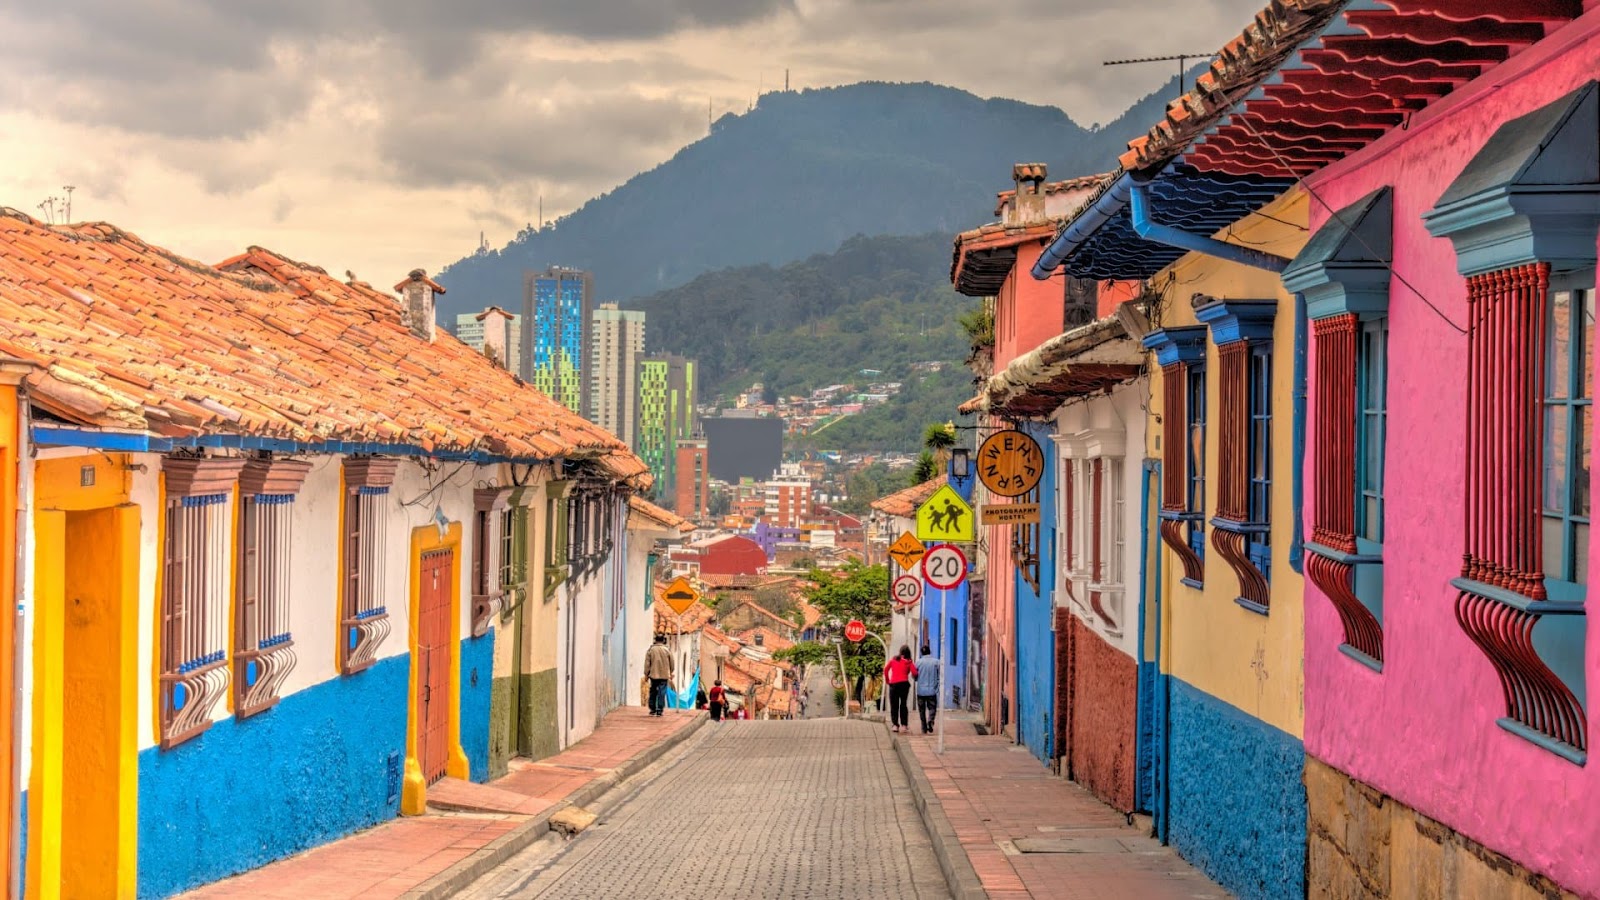 Colorful homes and views of the city and mountains